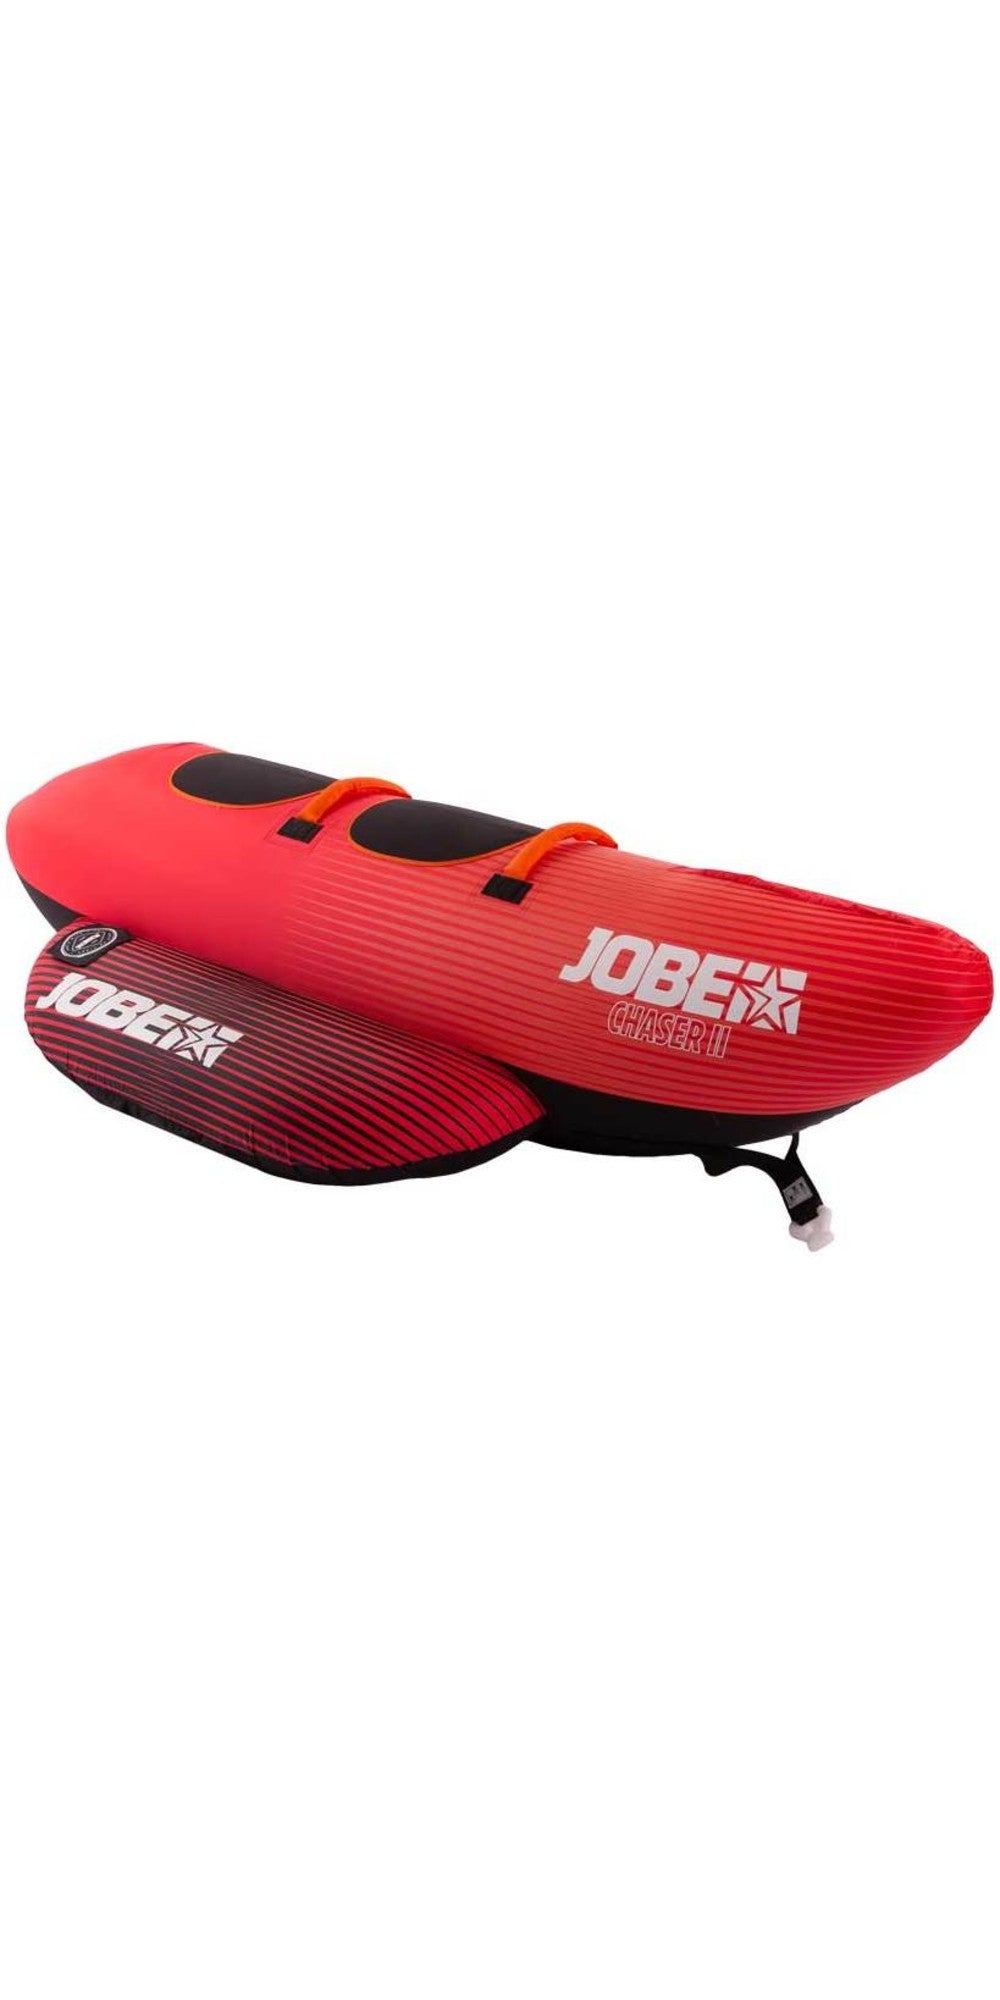 Jobe Chaser 2 Person Towable